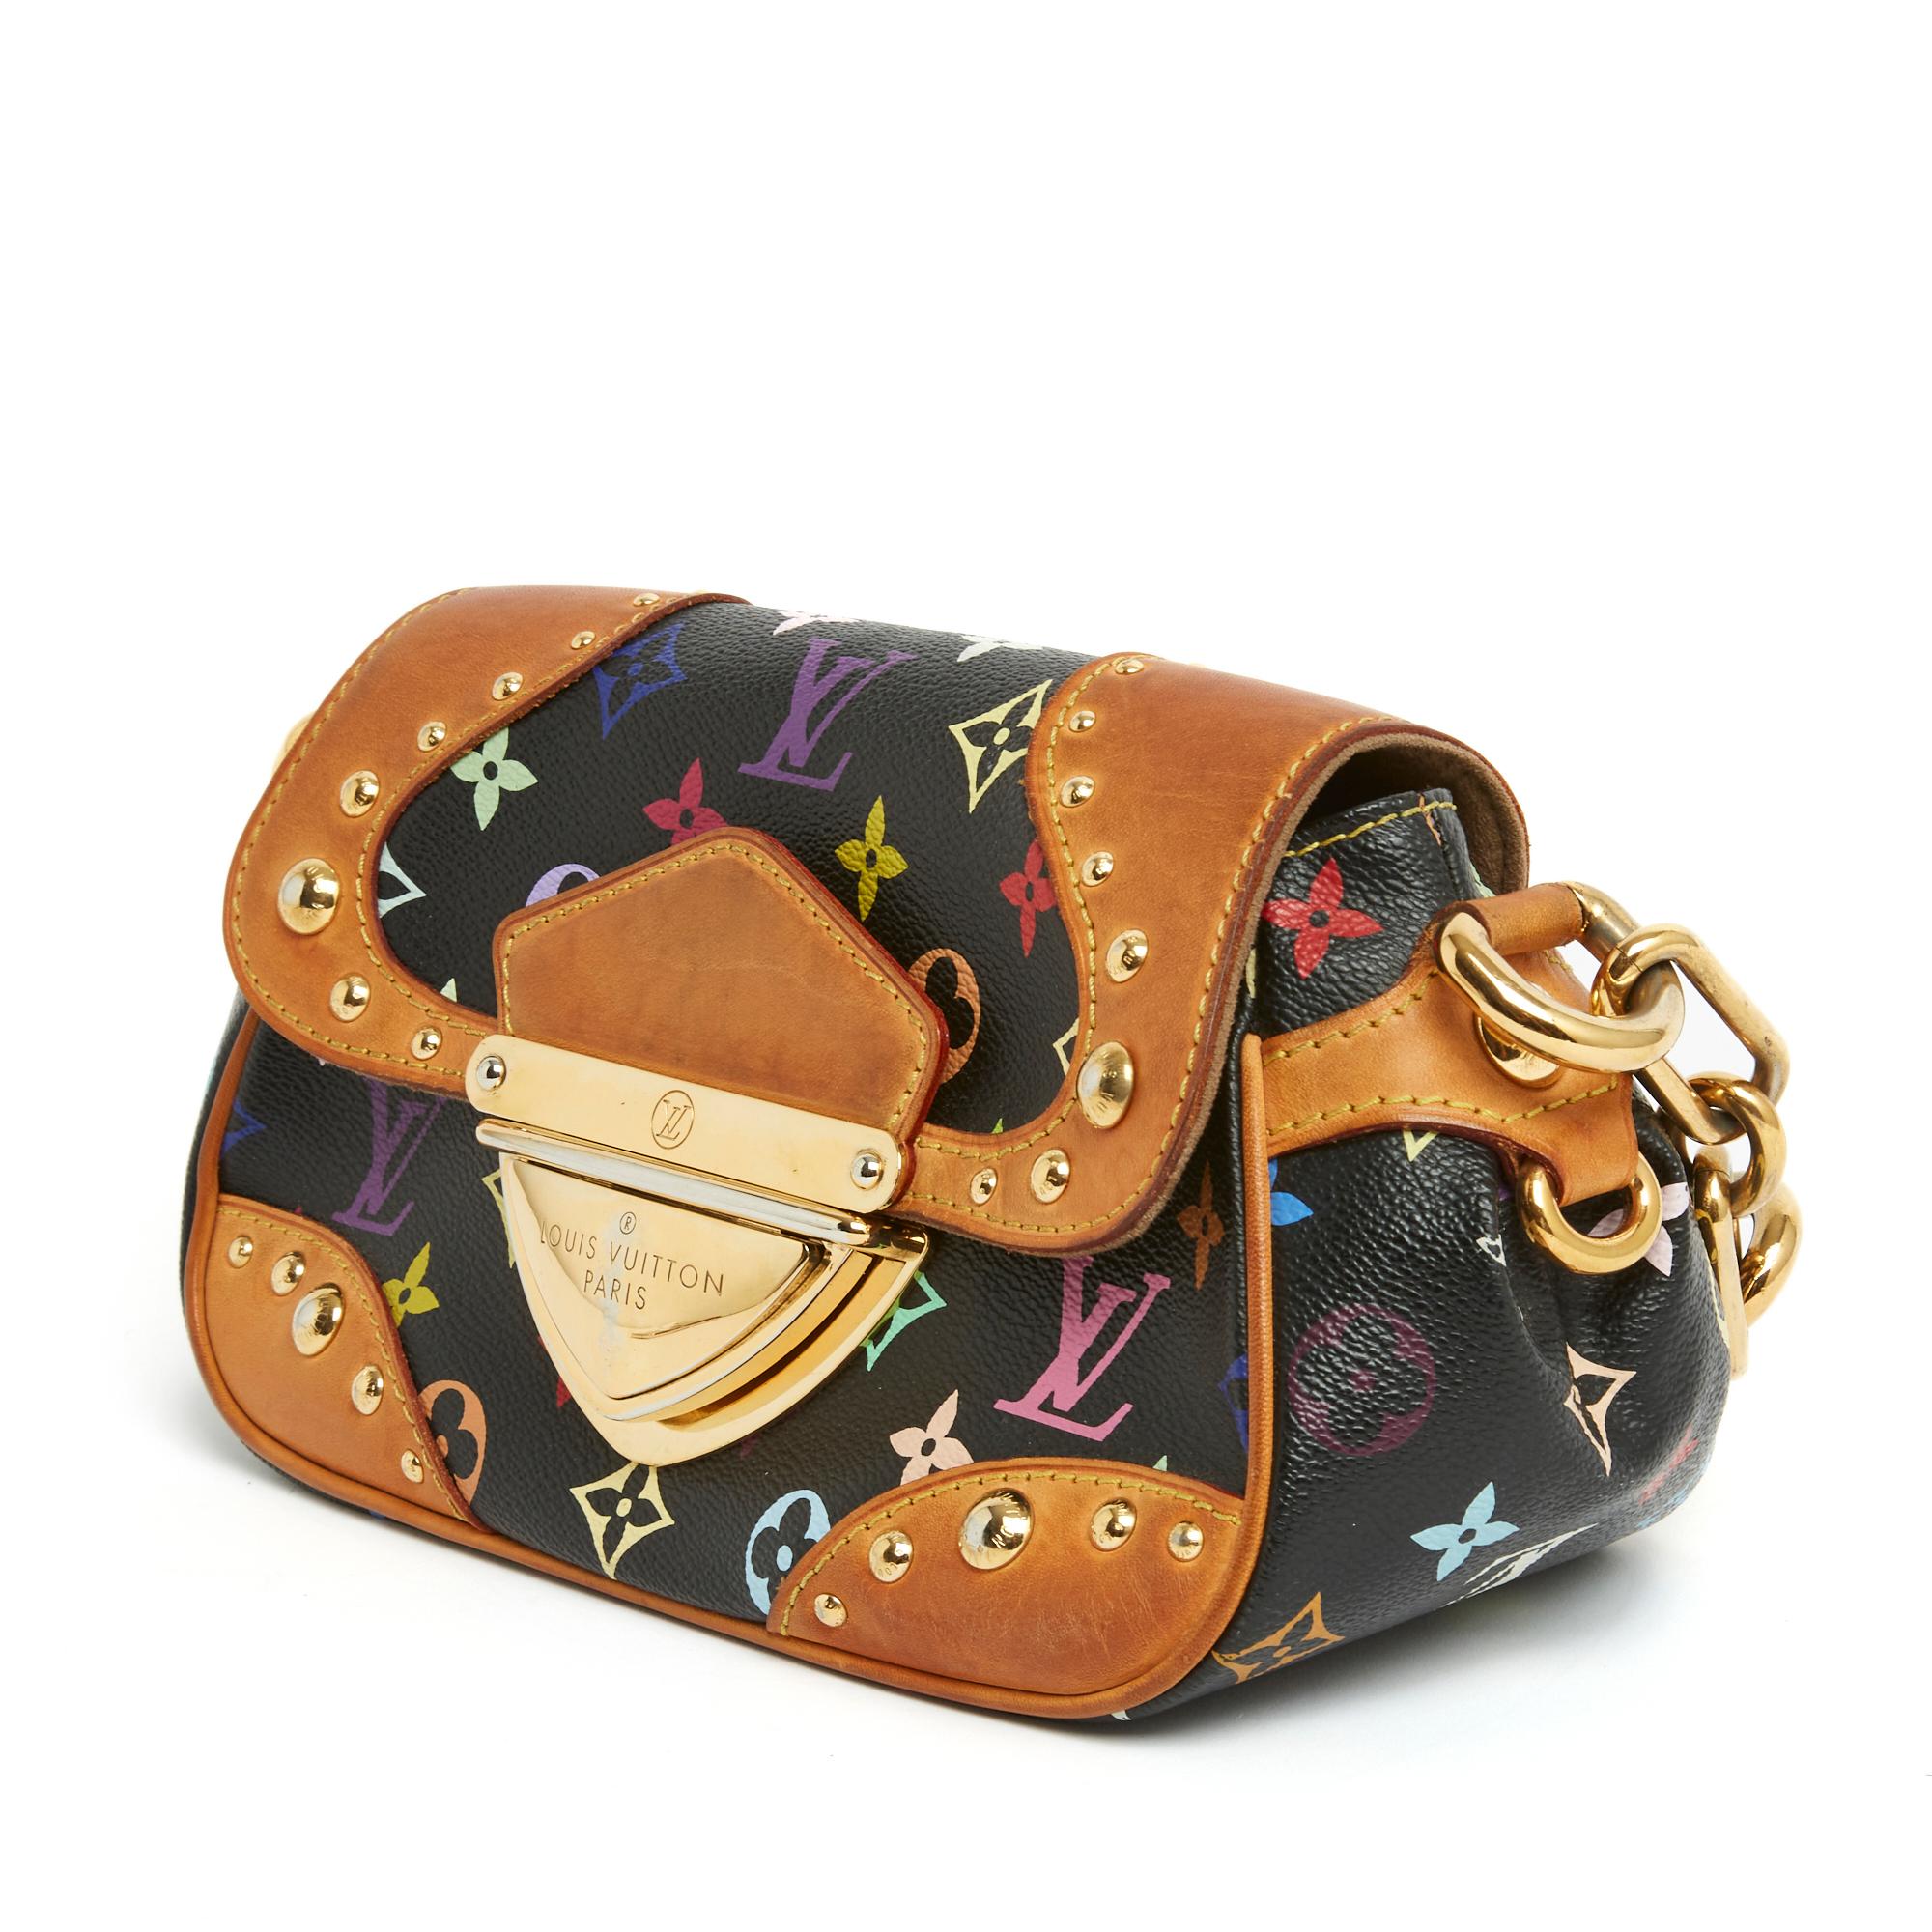 Louis Vuitton Marilyn bag by Murakami in black Monogram canvas with colorful patterns, natural leather inserts on the flap, sides and piping around the bag, beige suede interior with a patch pocket, flap closed with a large gold metal buckle signed